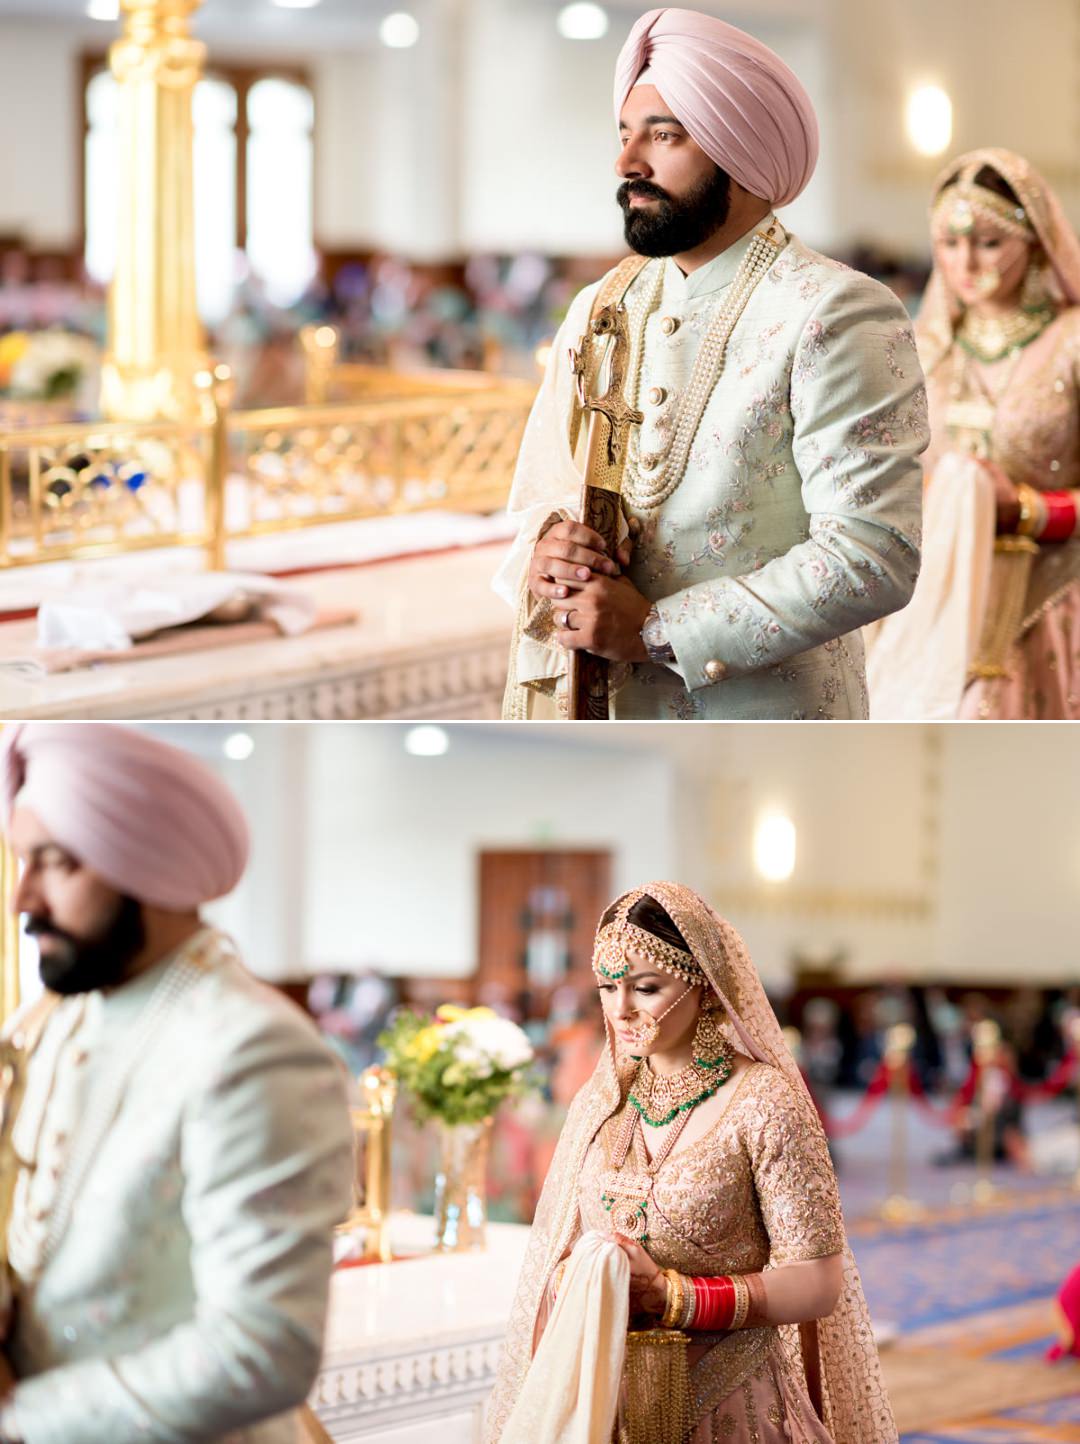 The Sikh wedding couple begin walking around the holy book